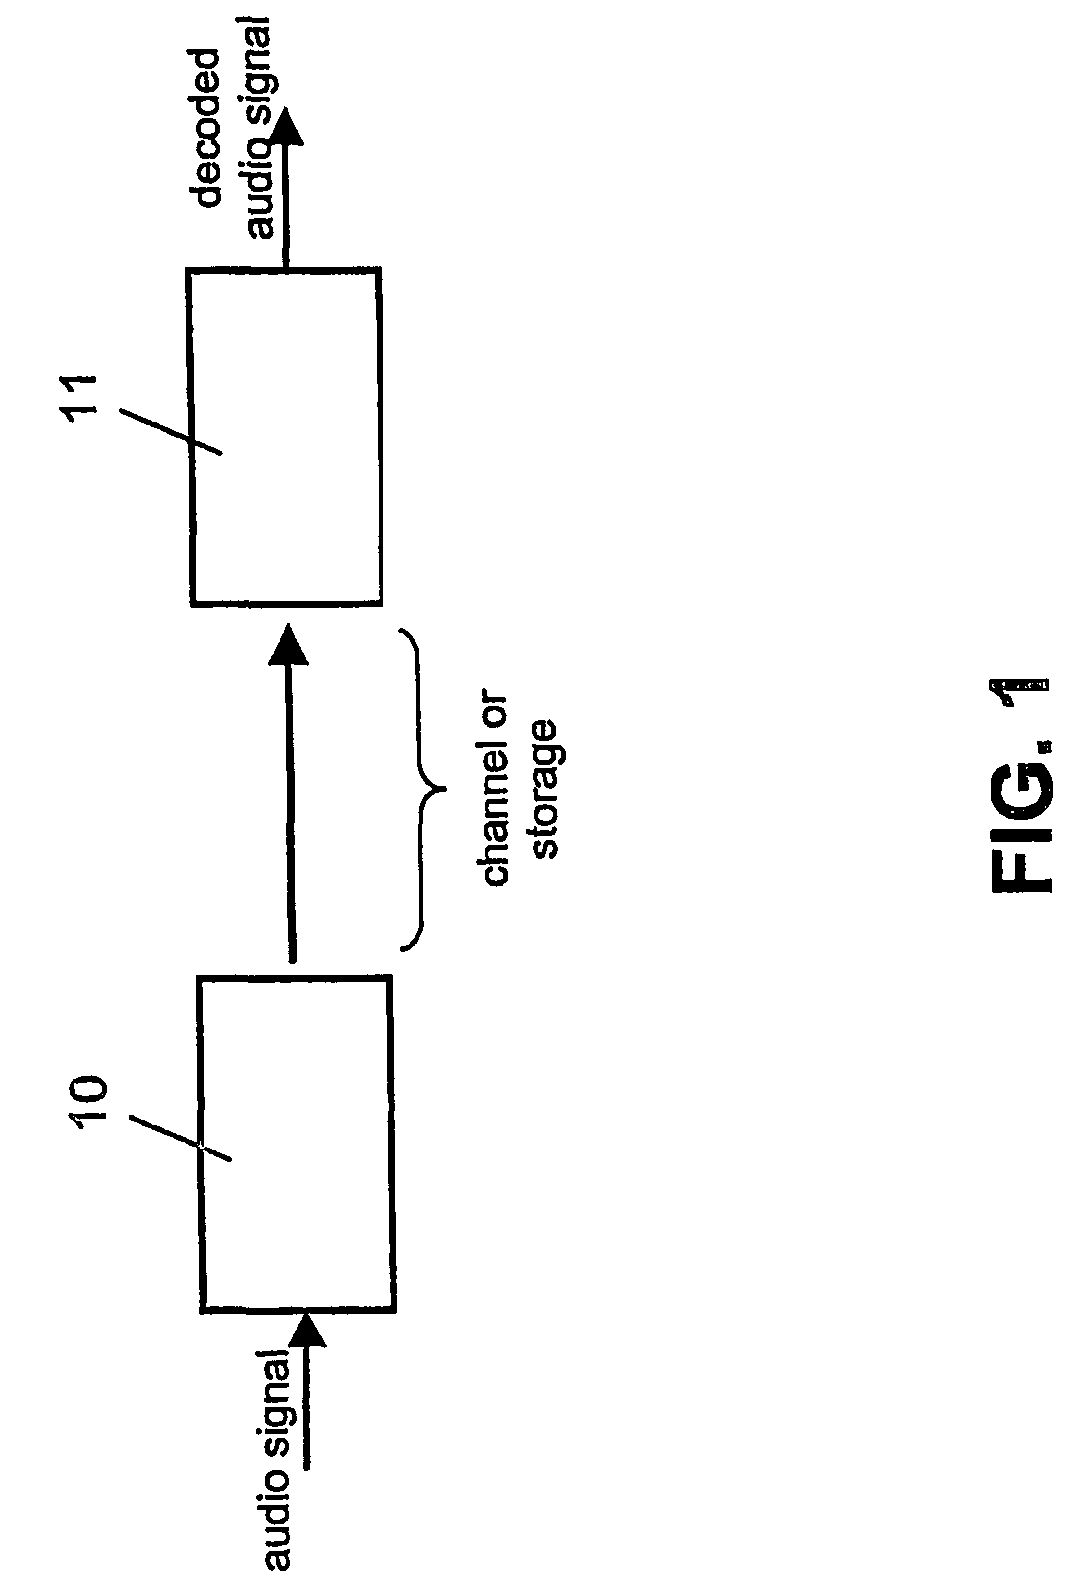 Support of a multichannel audio extension